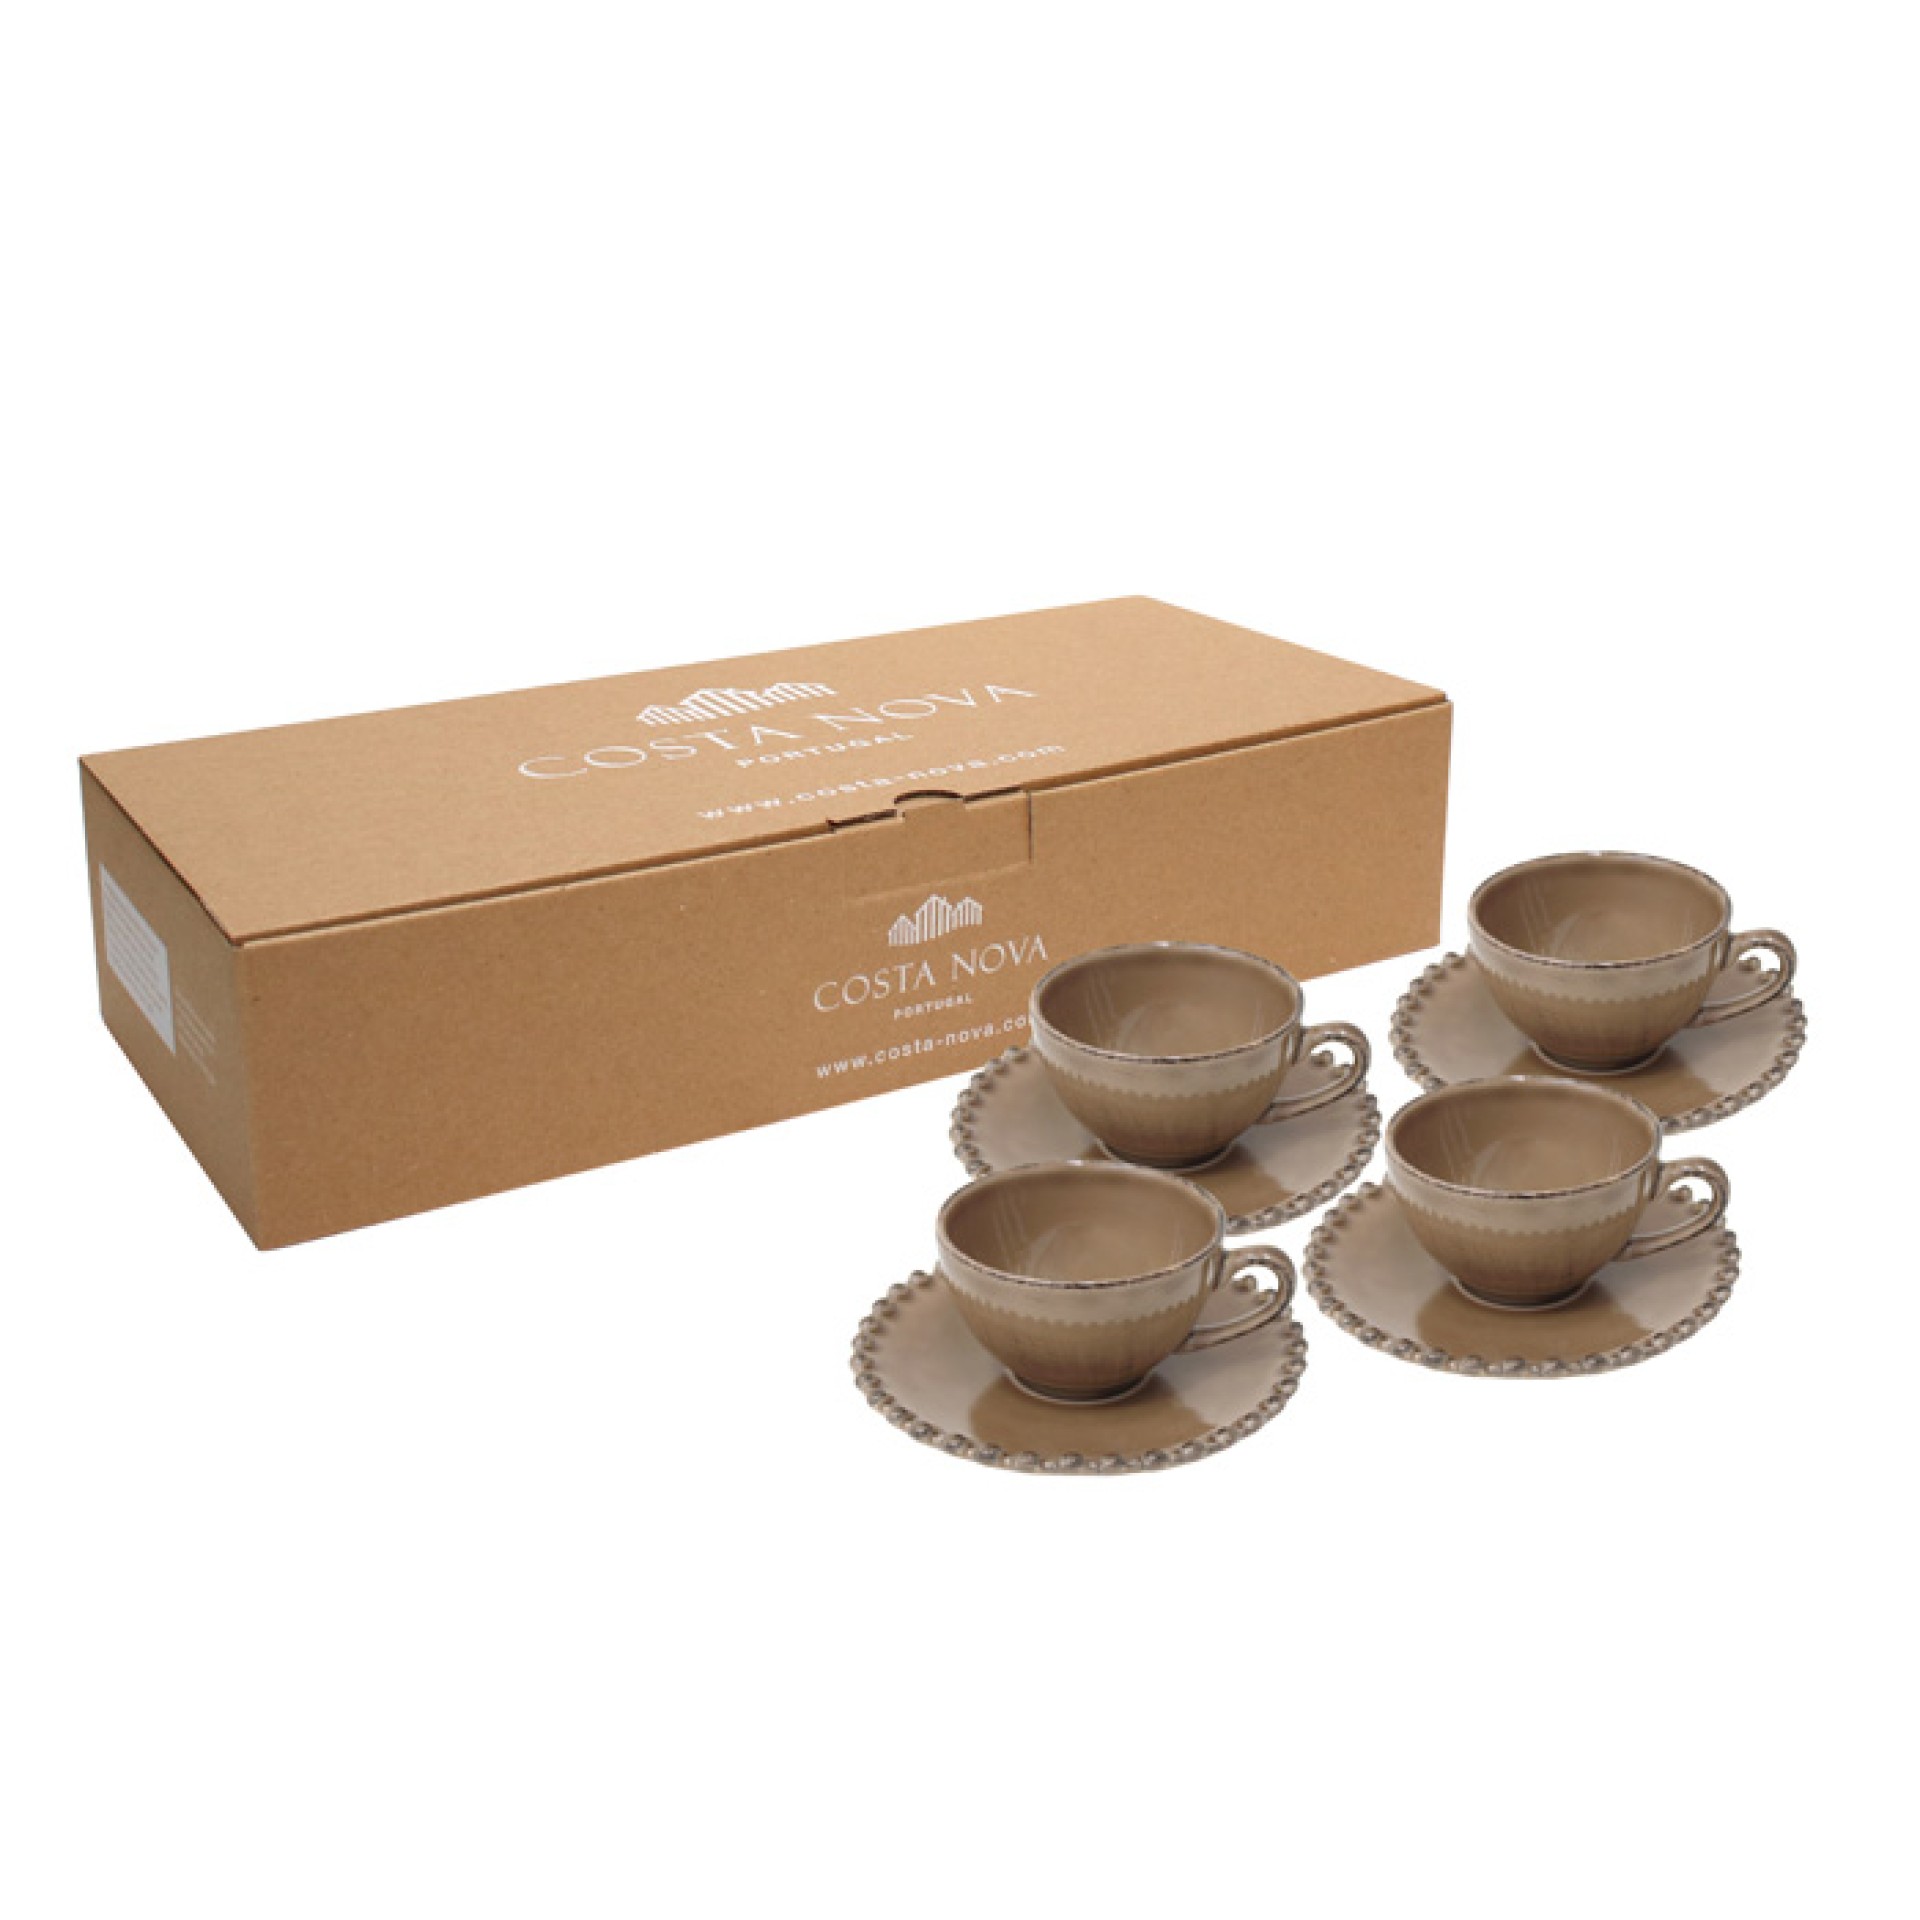 GIFT 4 COFFEE CUPS & SAUCERS PEARL COCOA